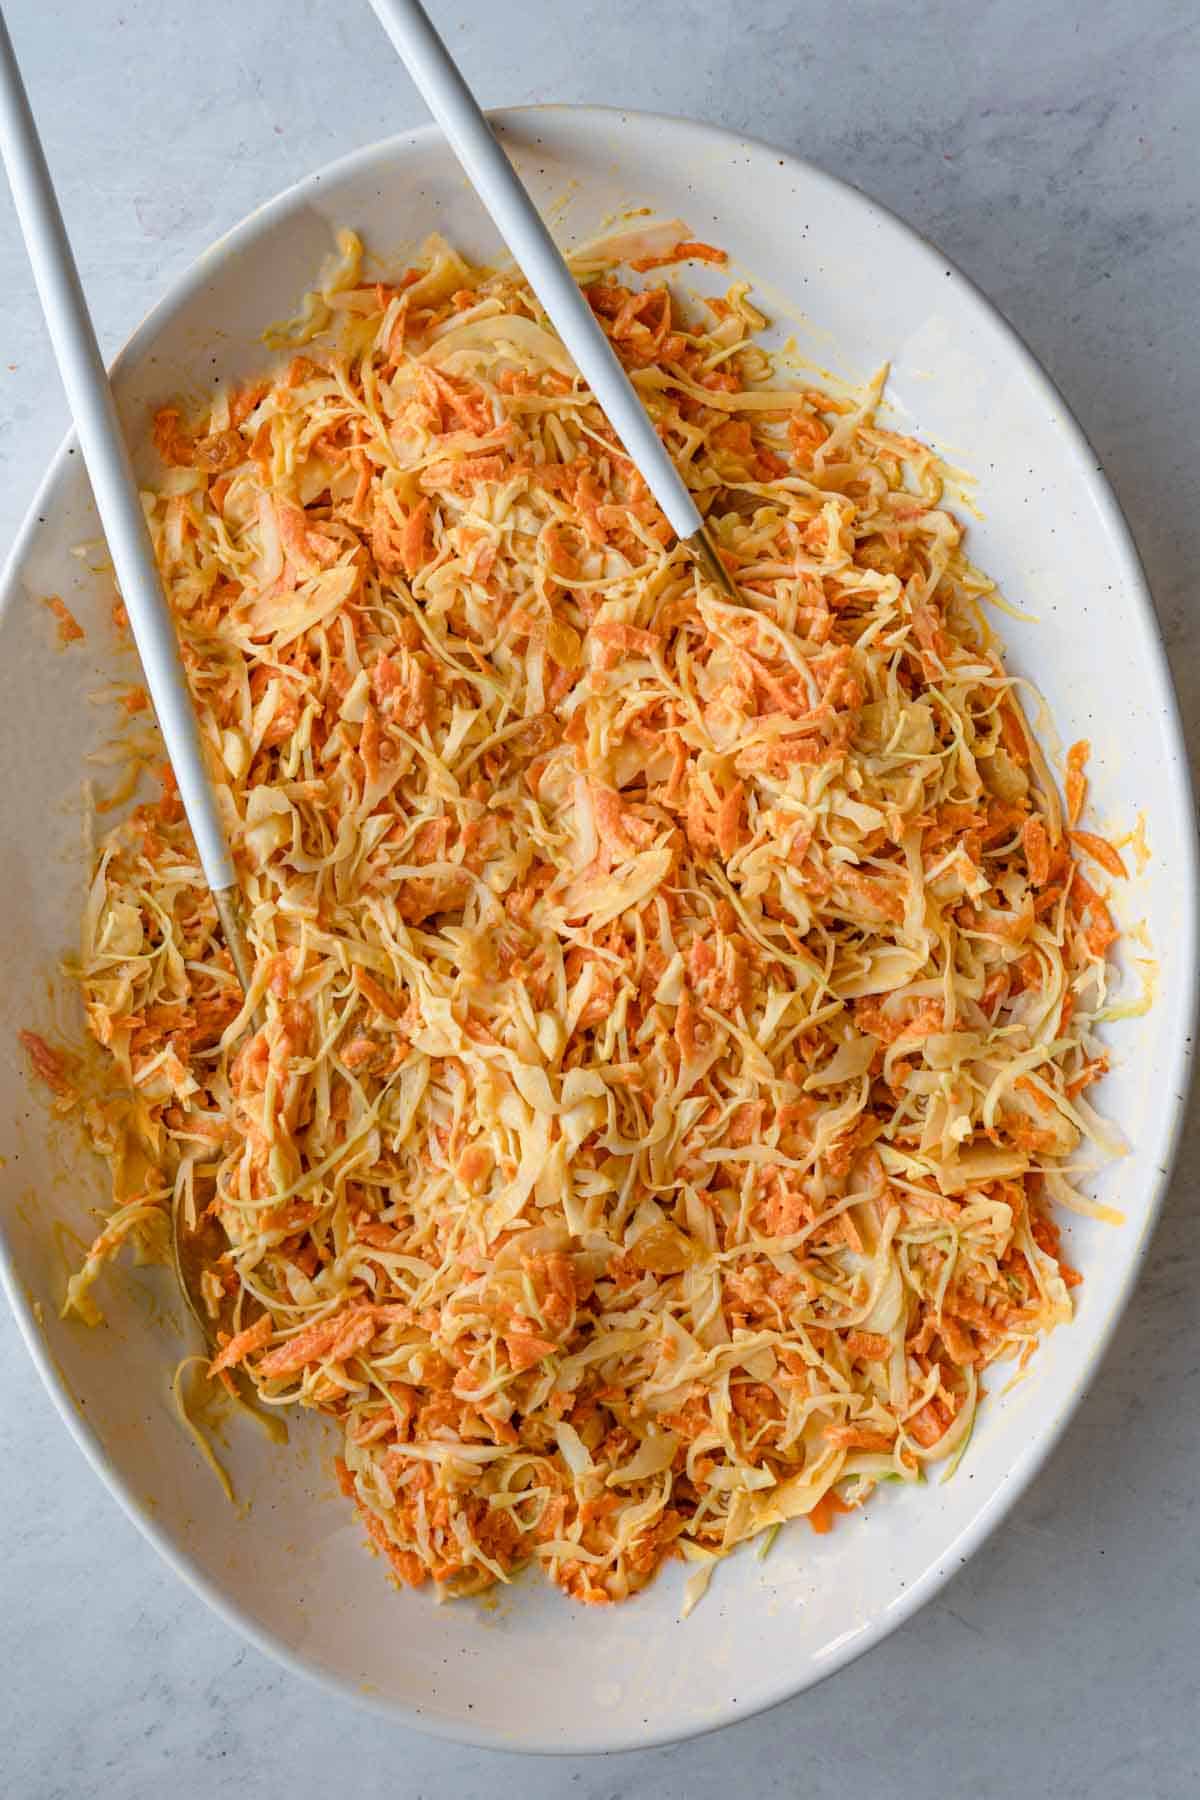 Vegan coleslaw in a large white oval bowl with salad servers.